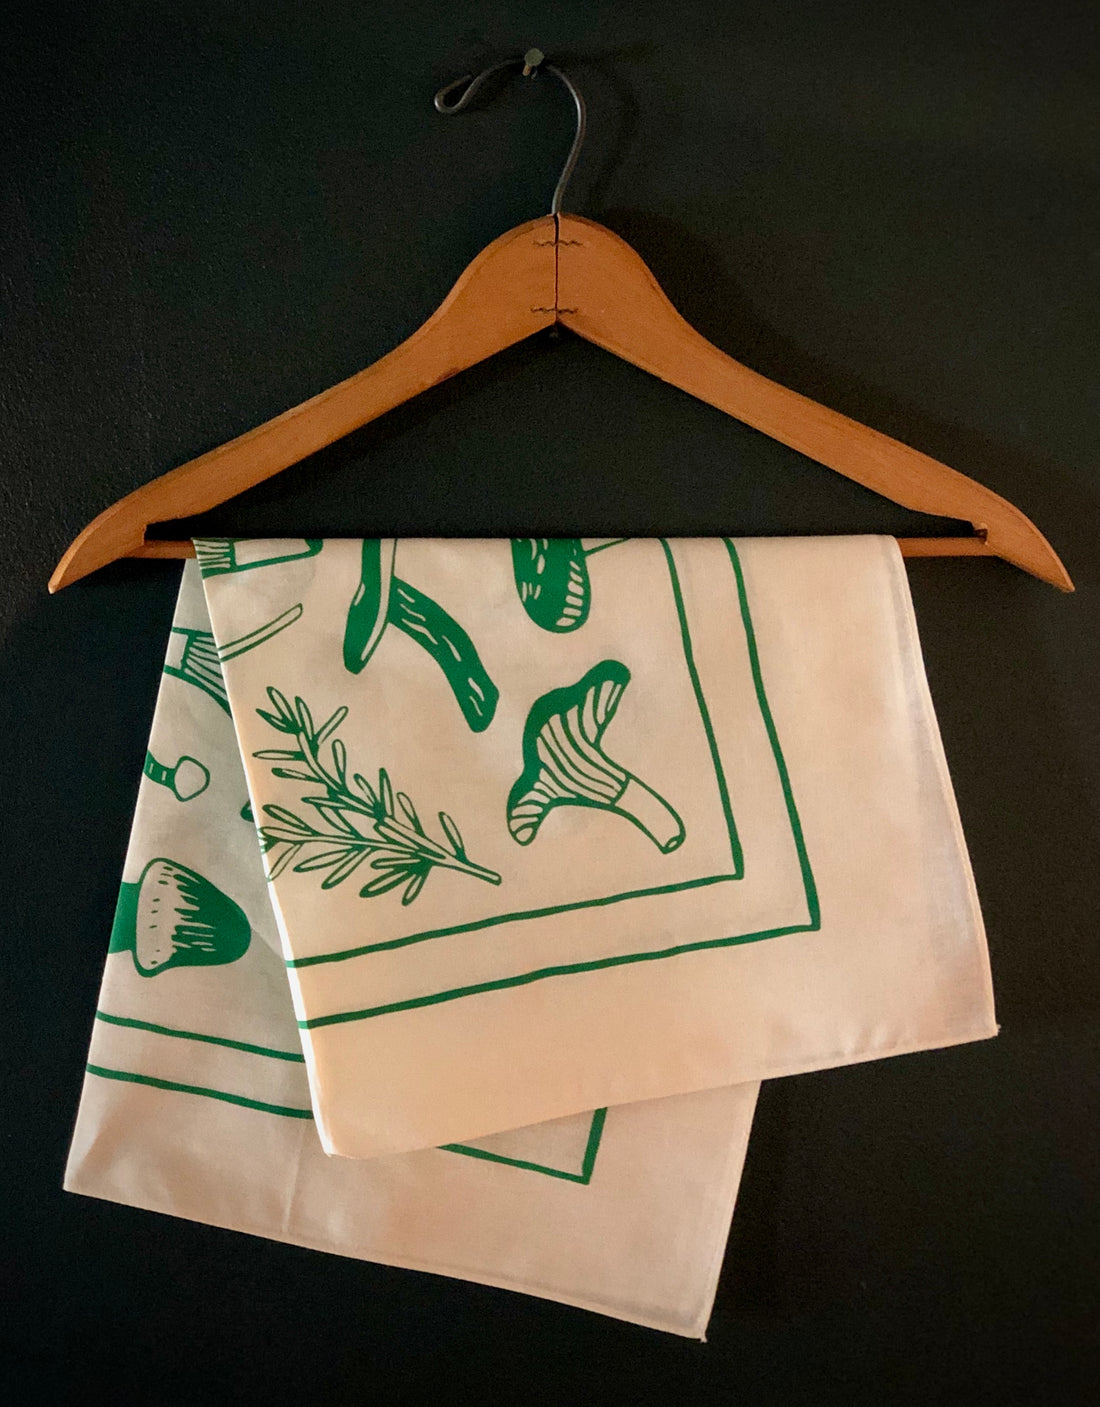 Cream and green evangeline bandana folded and hanging on a hanger. Bandana has illustrations of lavender, rosemary and mushrooms.